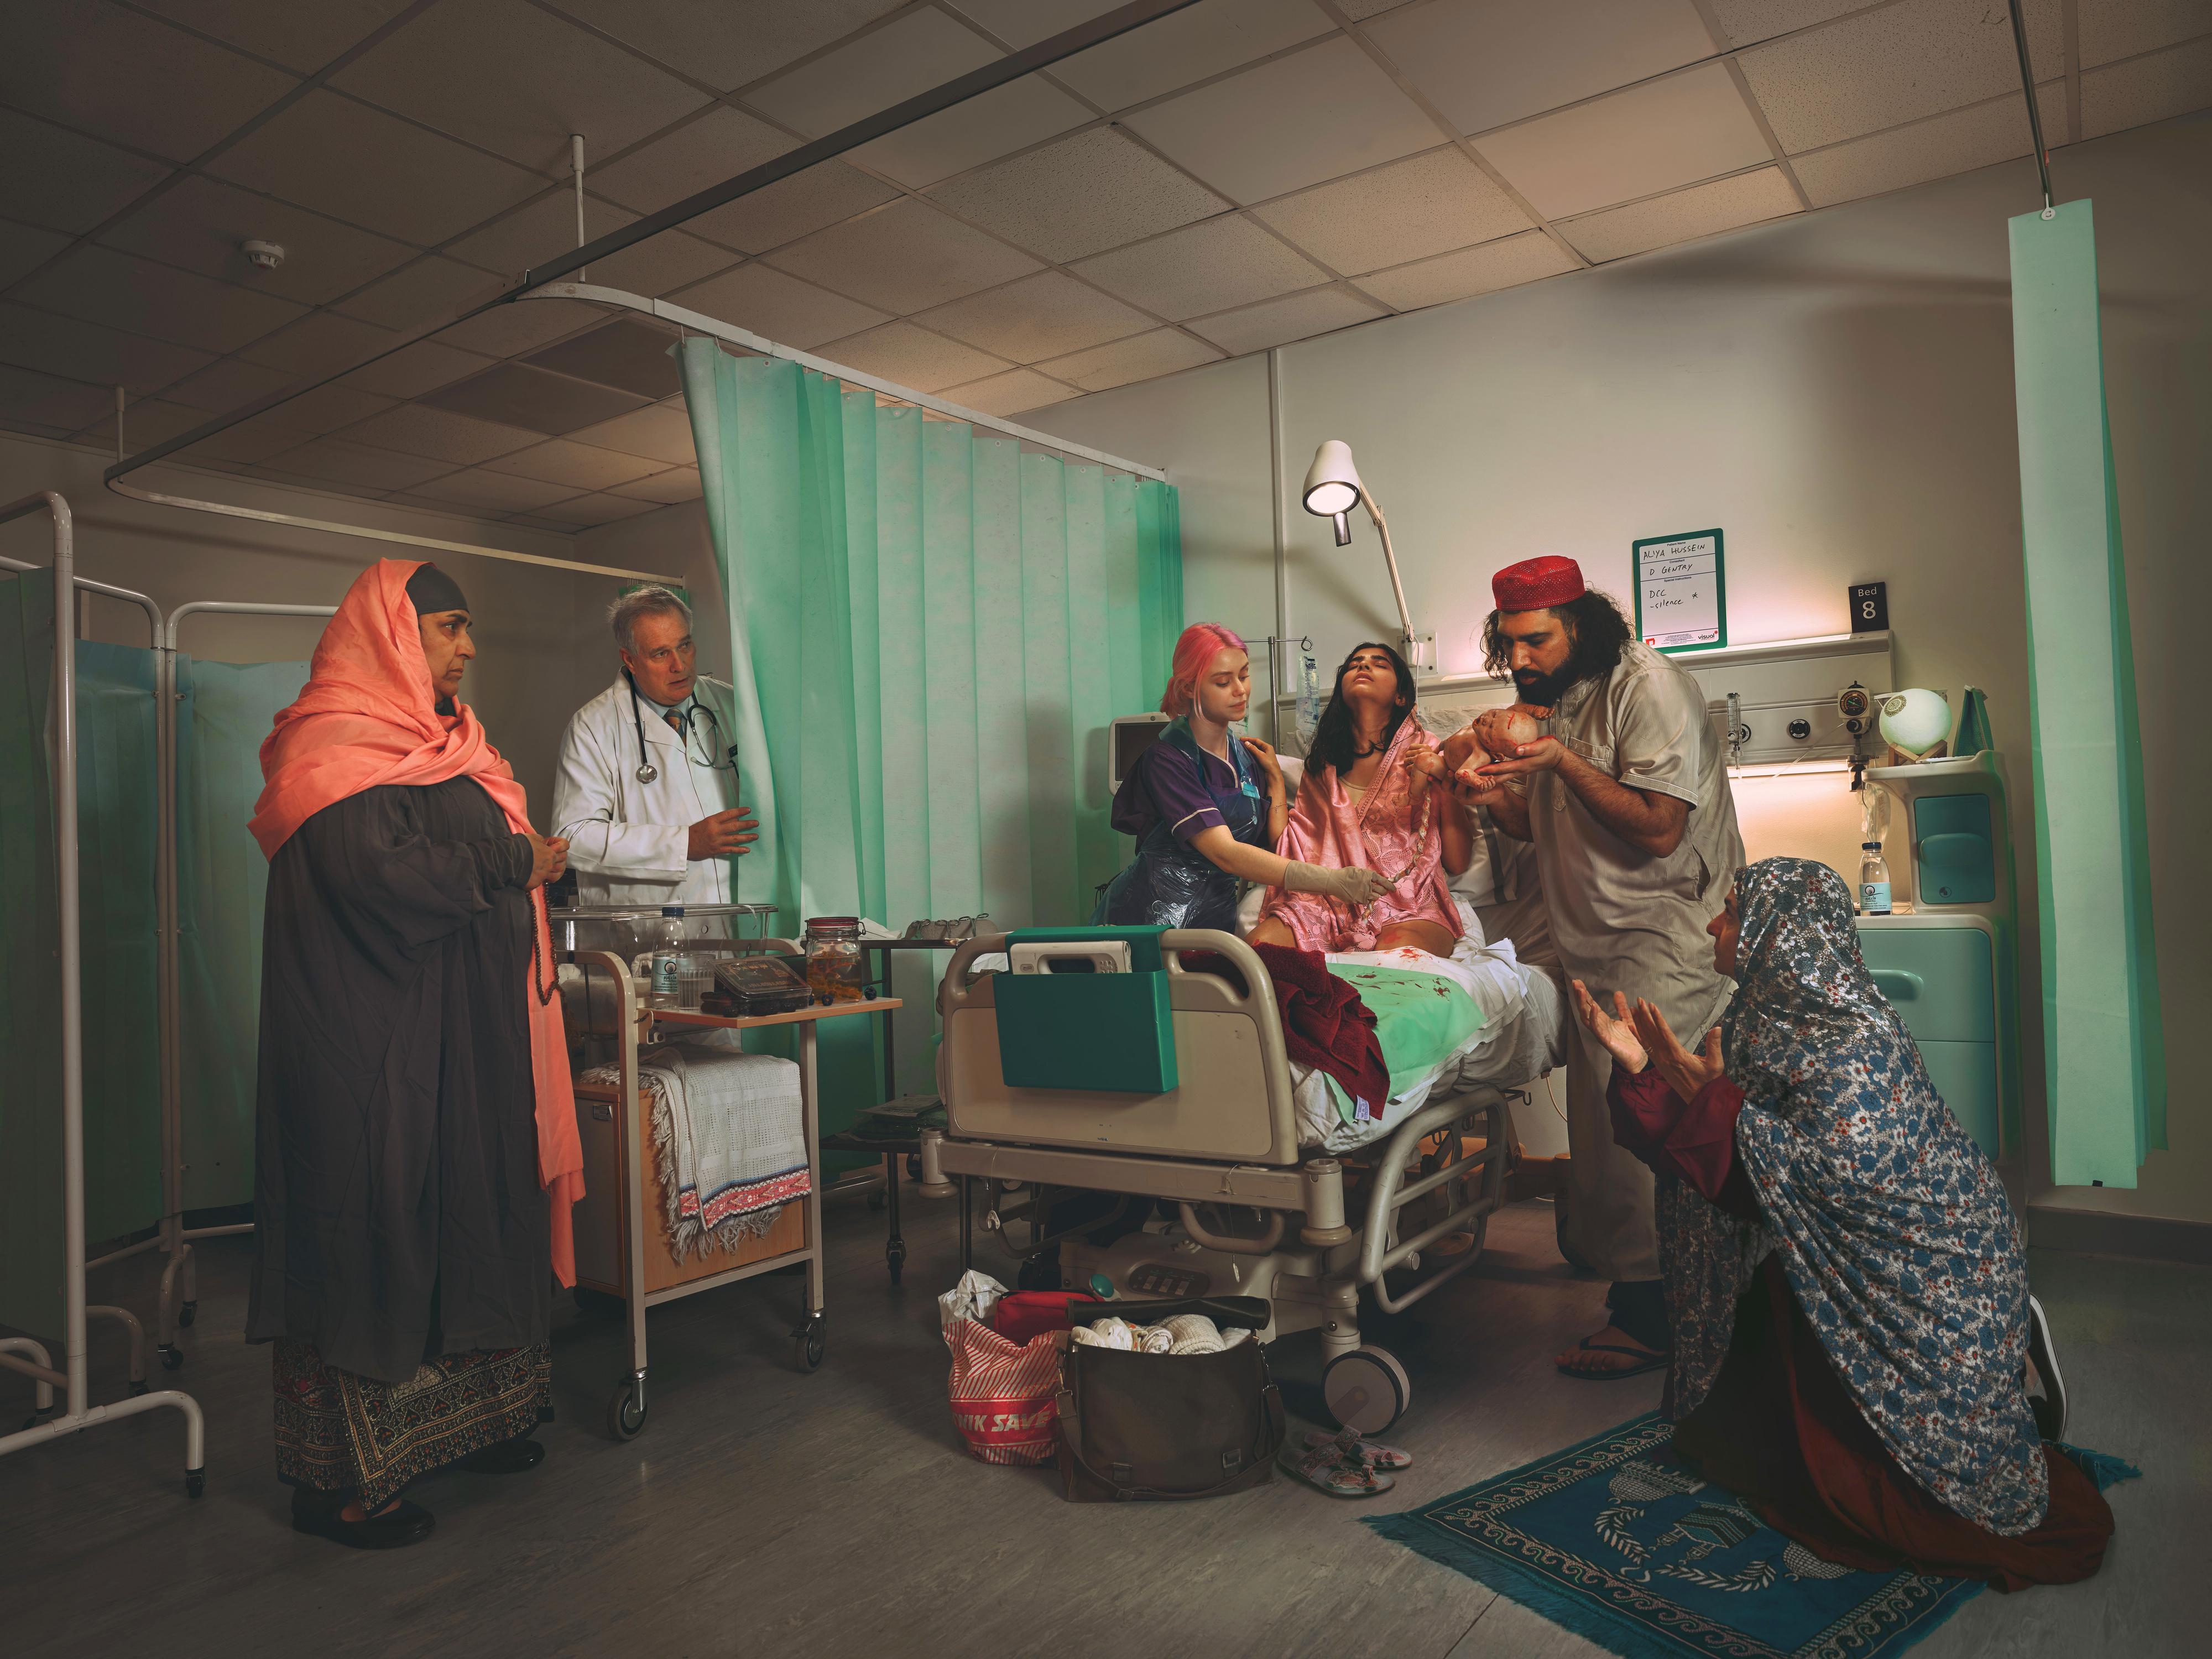 Natalie Lennard Color Photograph - Call to Prayer - Staged Photograph of Muslim Birth Scene (Peach+Teal)